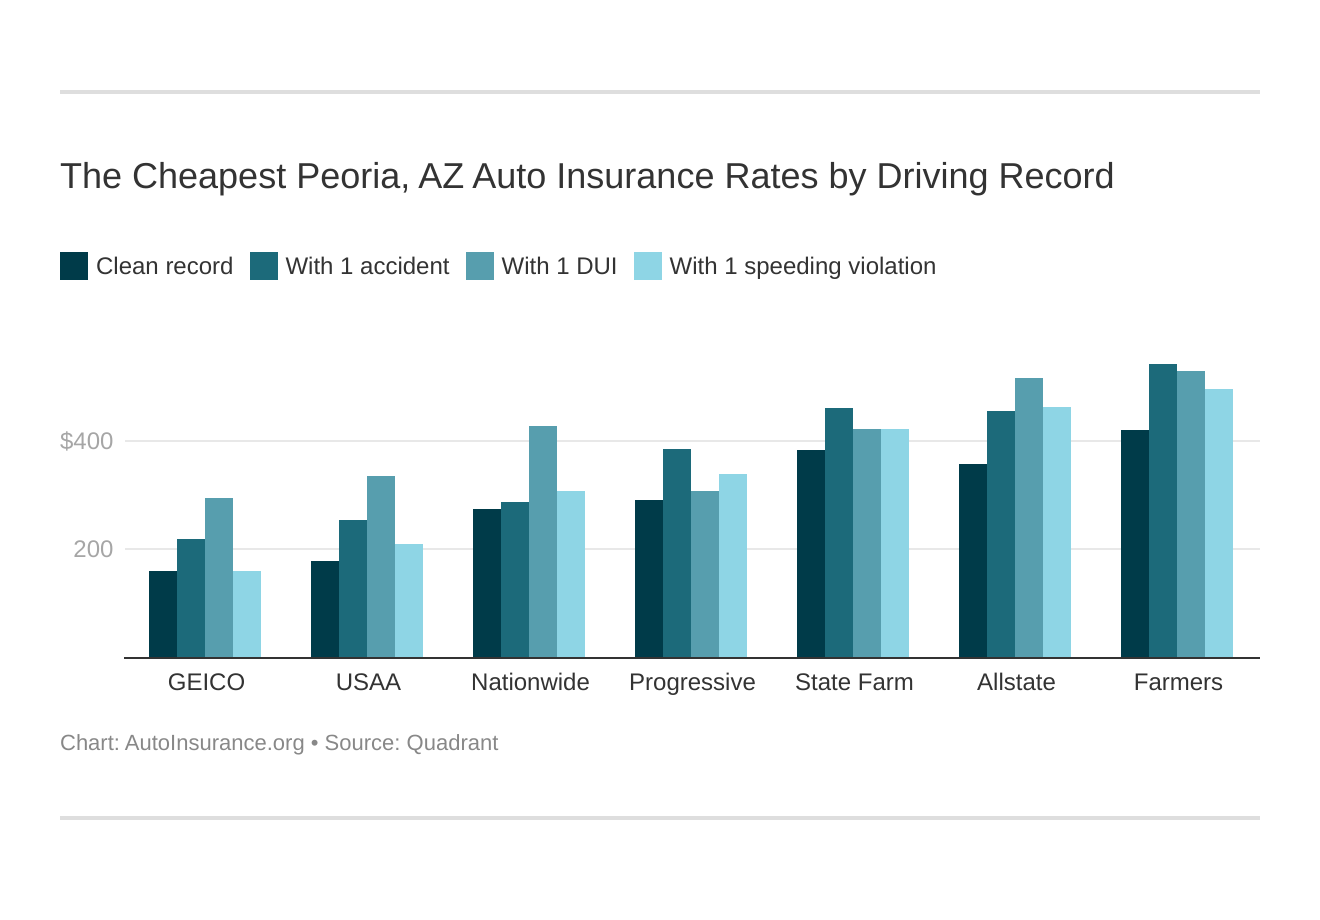 The Cheapest Peoria, AZ Auto Insurance Rates by Driving Record